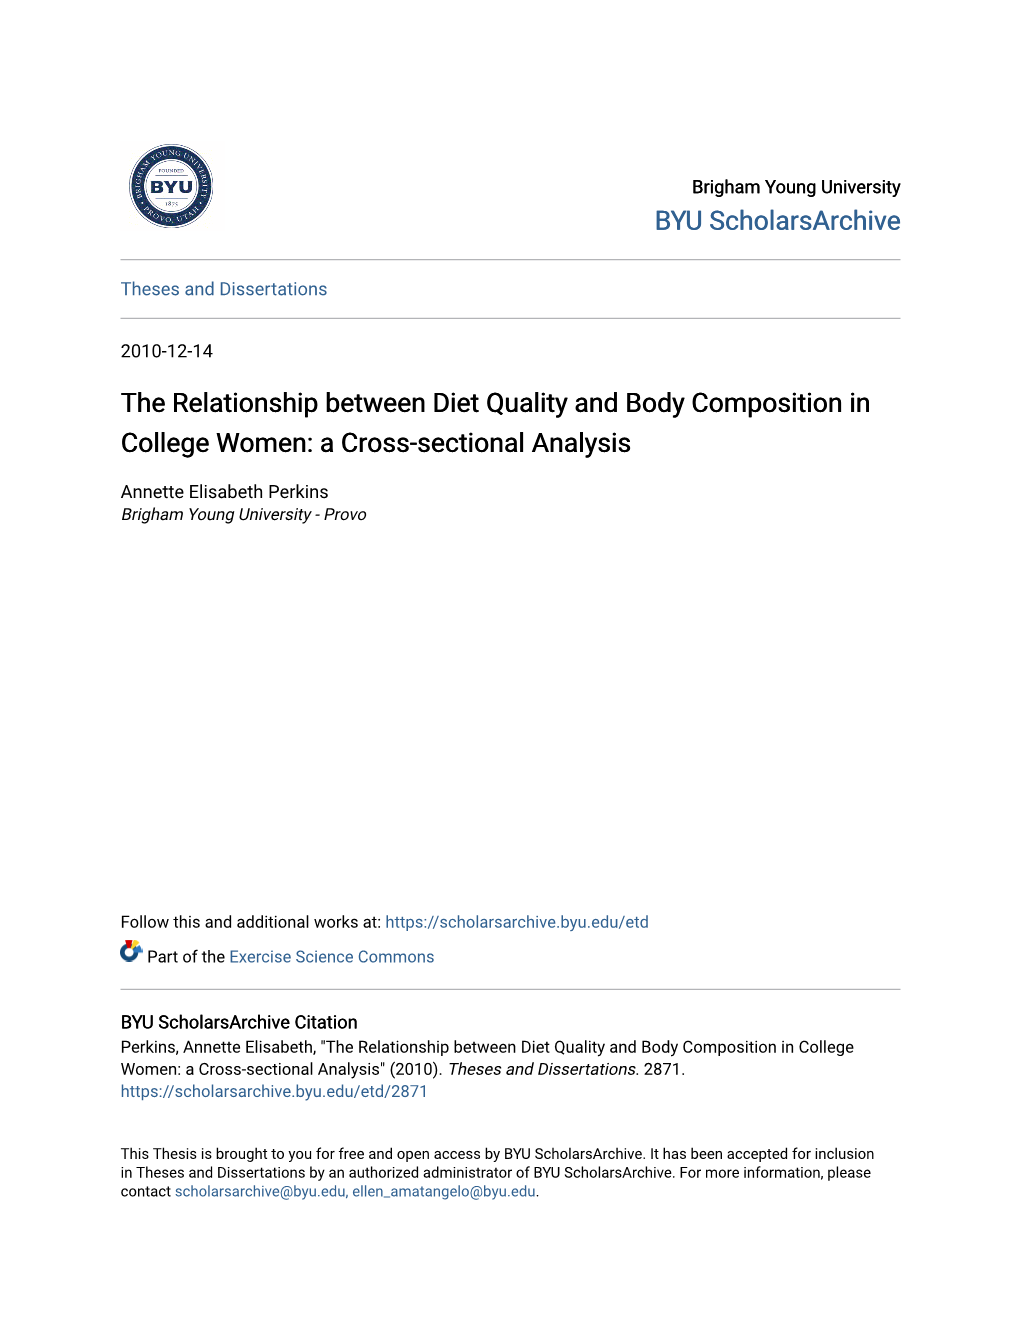 The Relationship Between Diet Quality and Body Composition in College Women: a Cross-Sectional Analysis